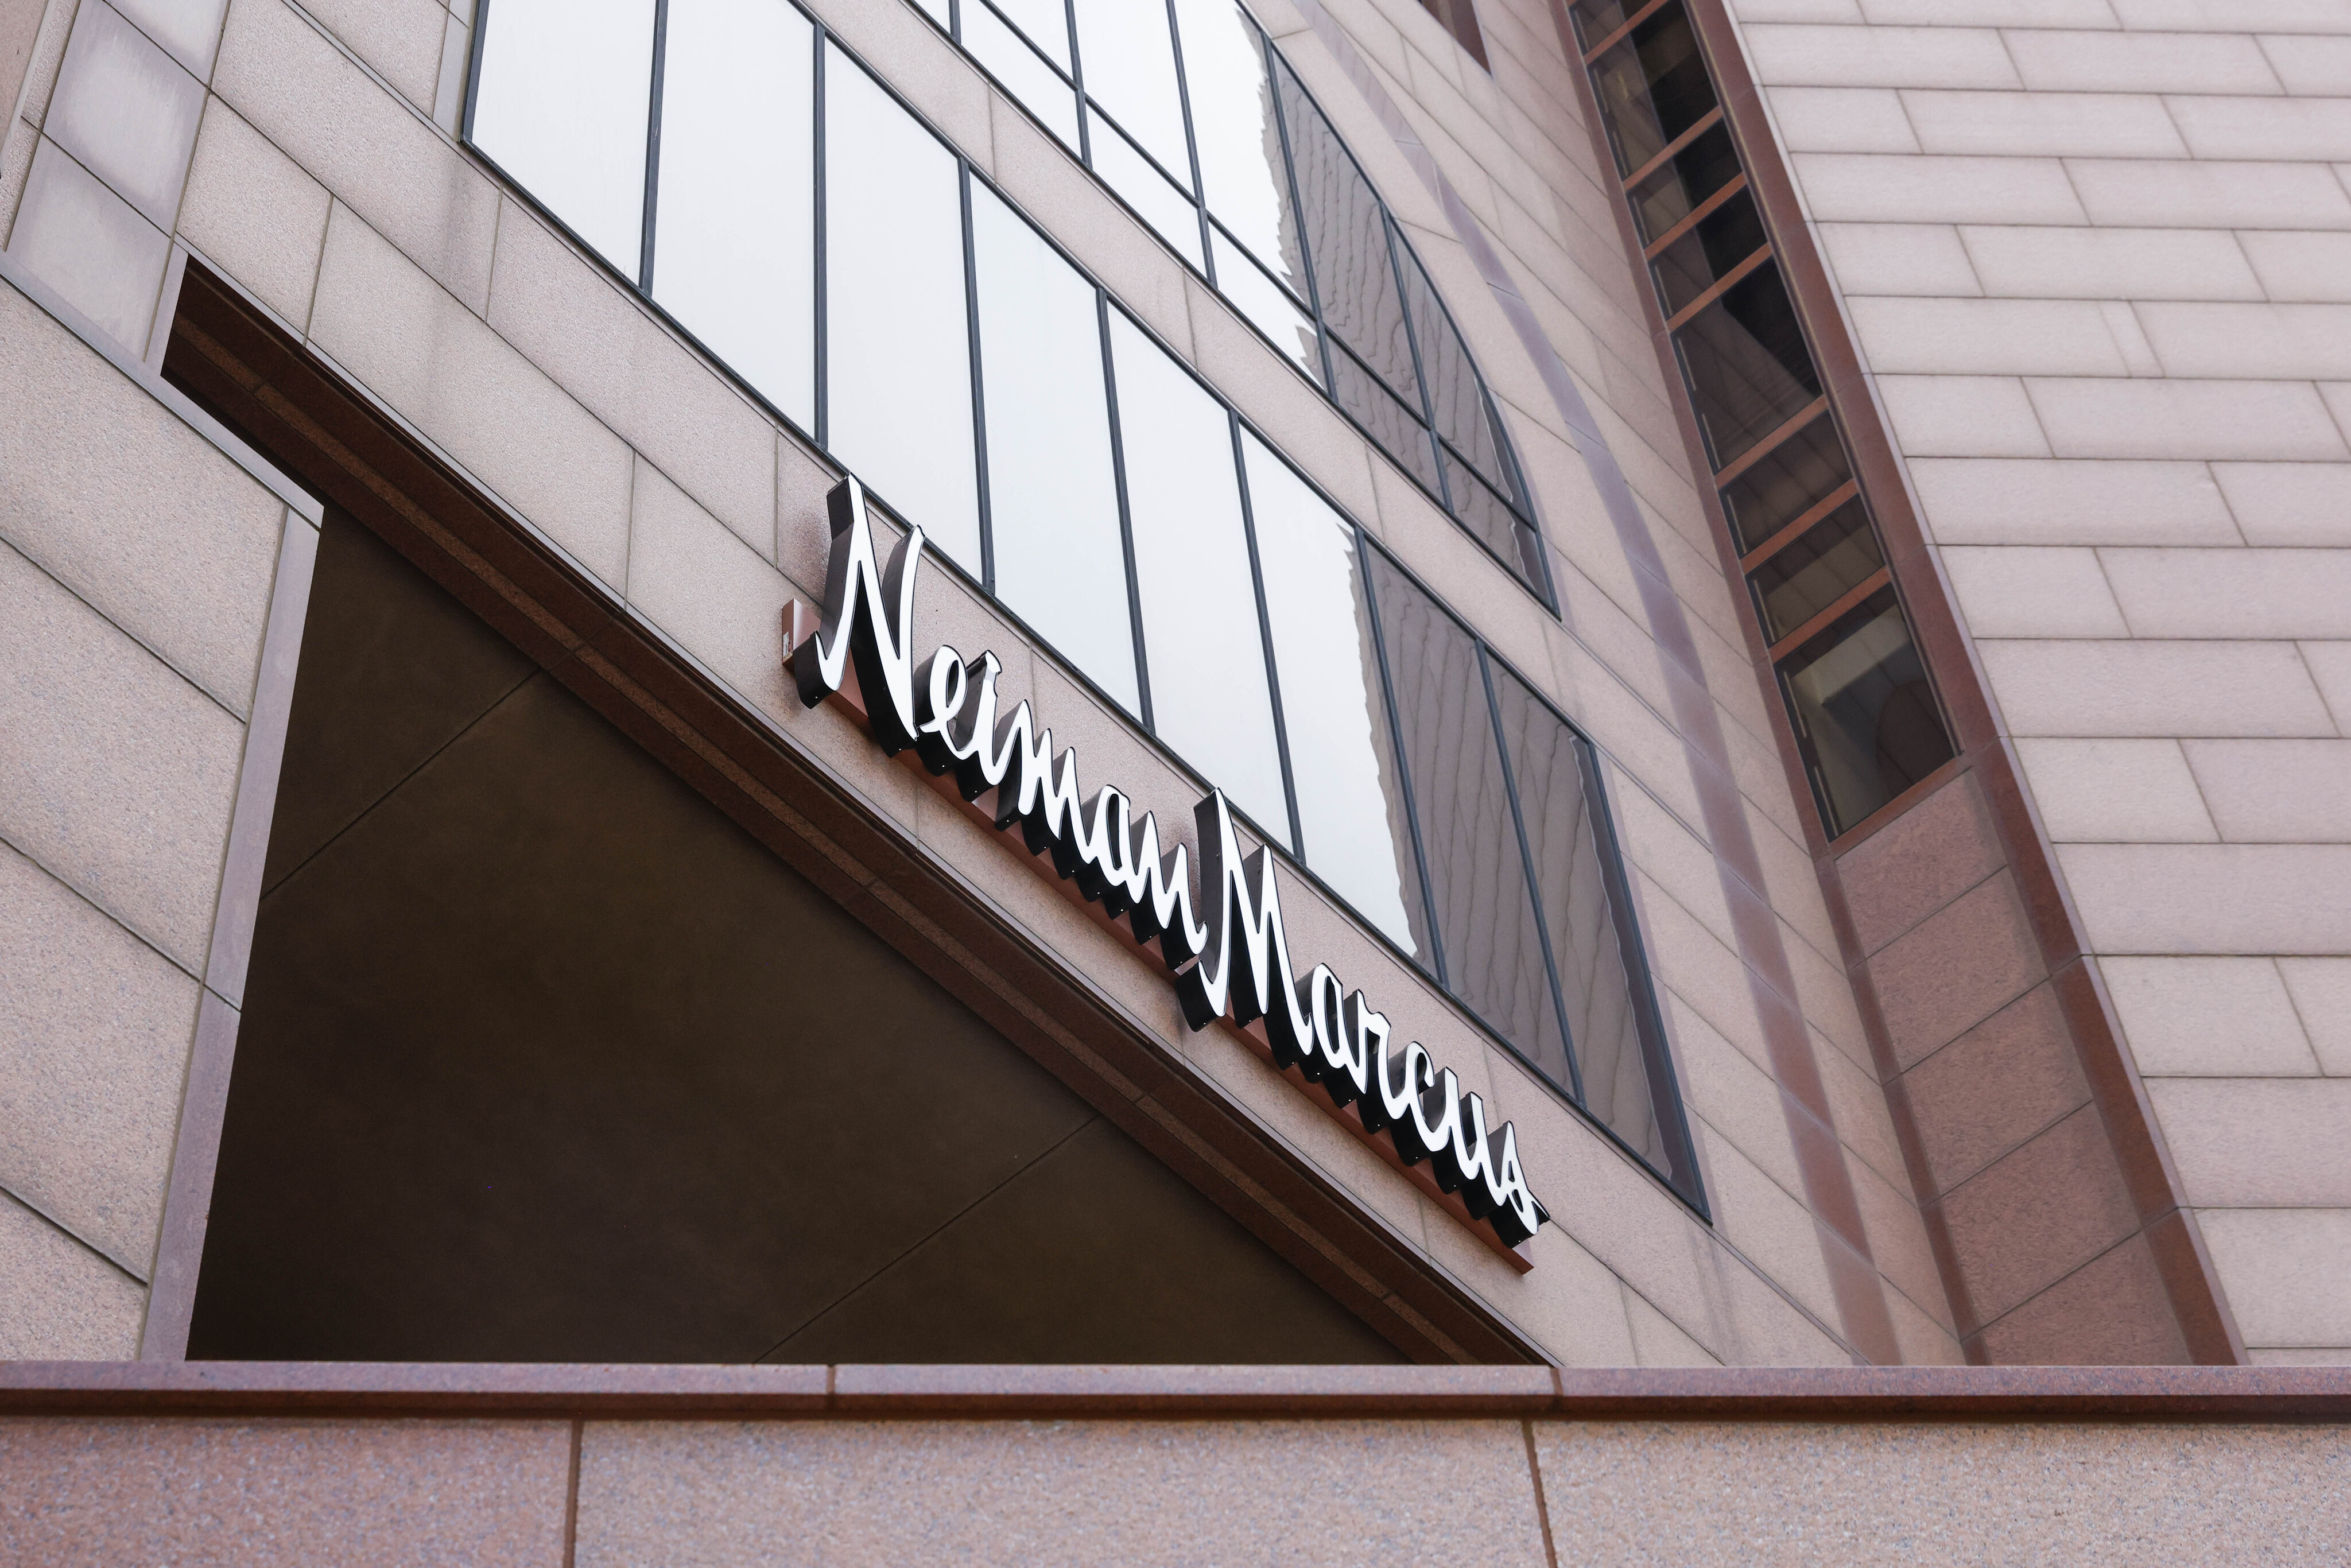 In Department Store News, Neiman Marcus Sale Called Off